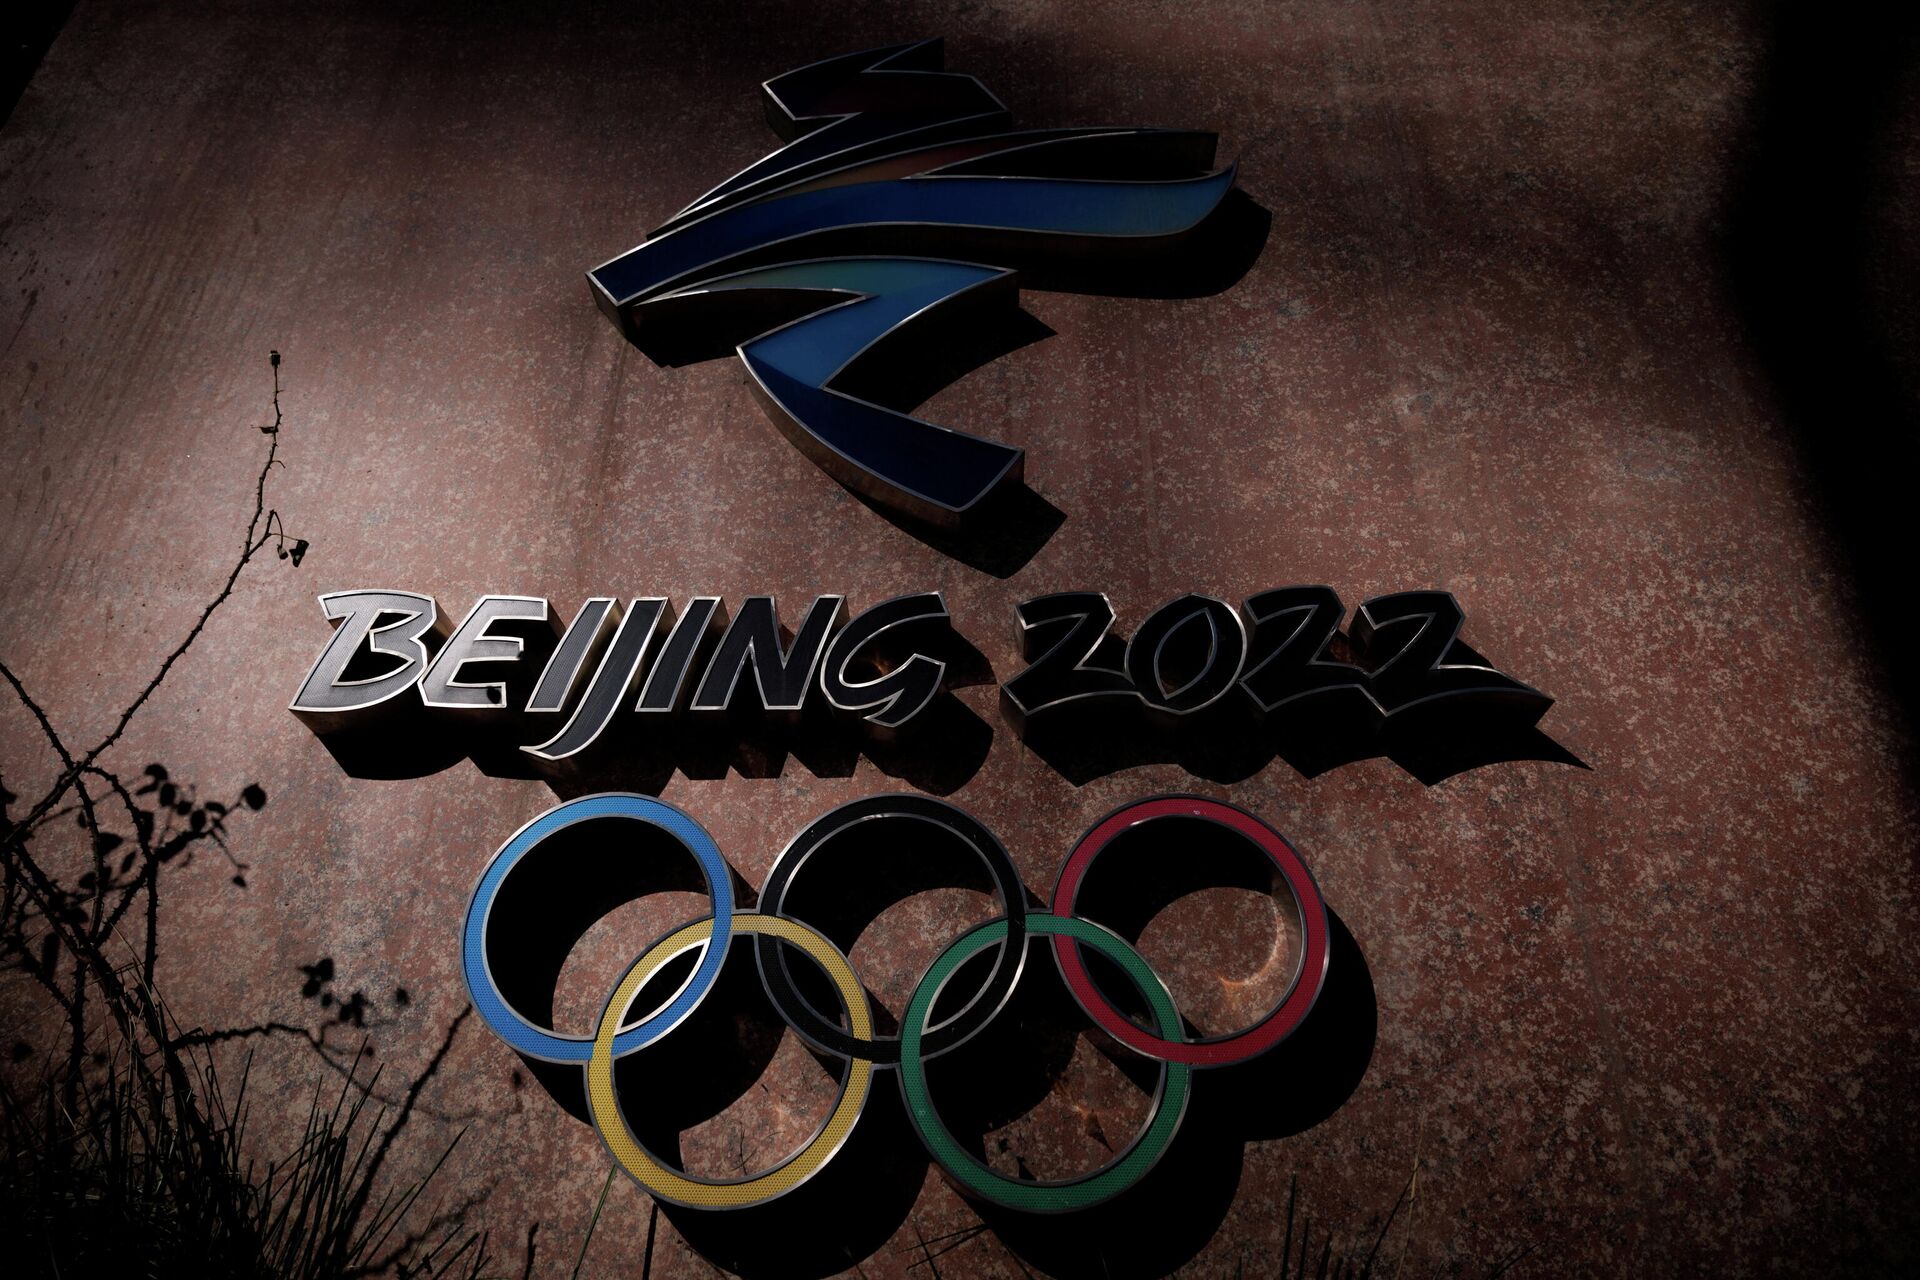 The Beijing 2022 logo is seen outside the headquarters of the Beijing Organising Committee for the 2022 Olympic and Paralympic Winter Games in Shougang Park, the site of a former steel mill, in Beijing, China, November 10, 2021. - Sputnik International, 1920, 13.12.2021